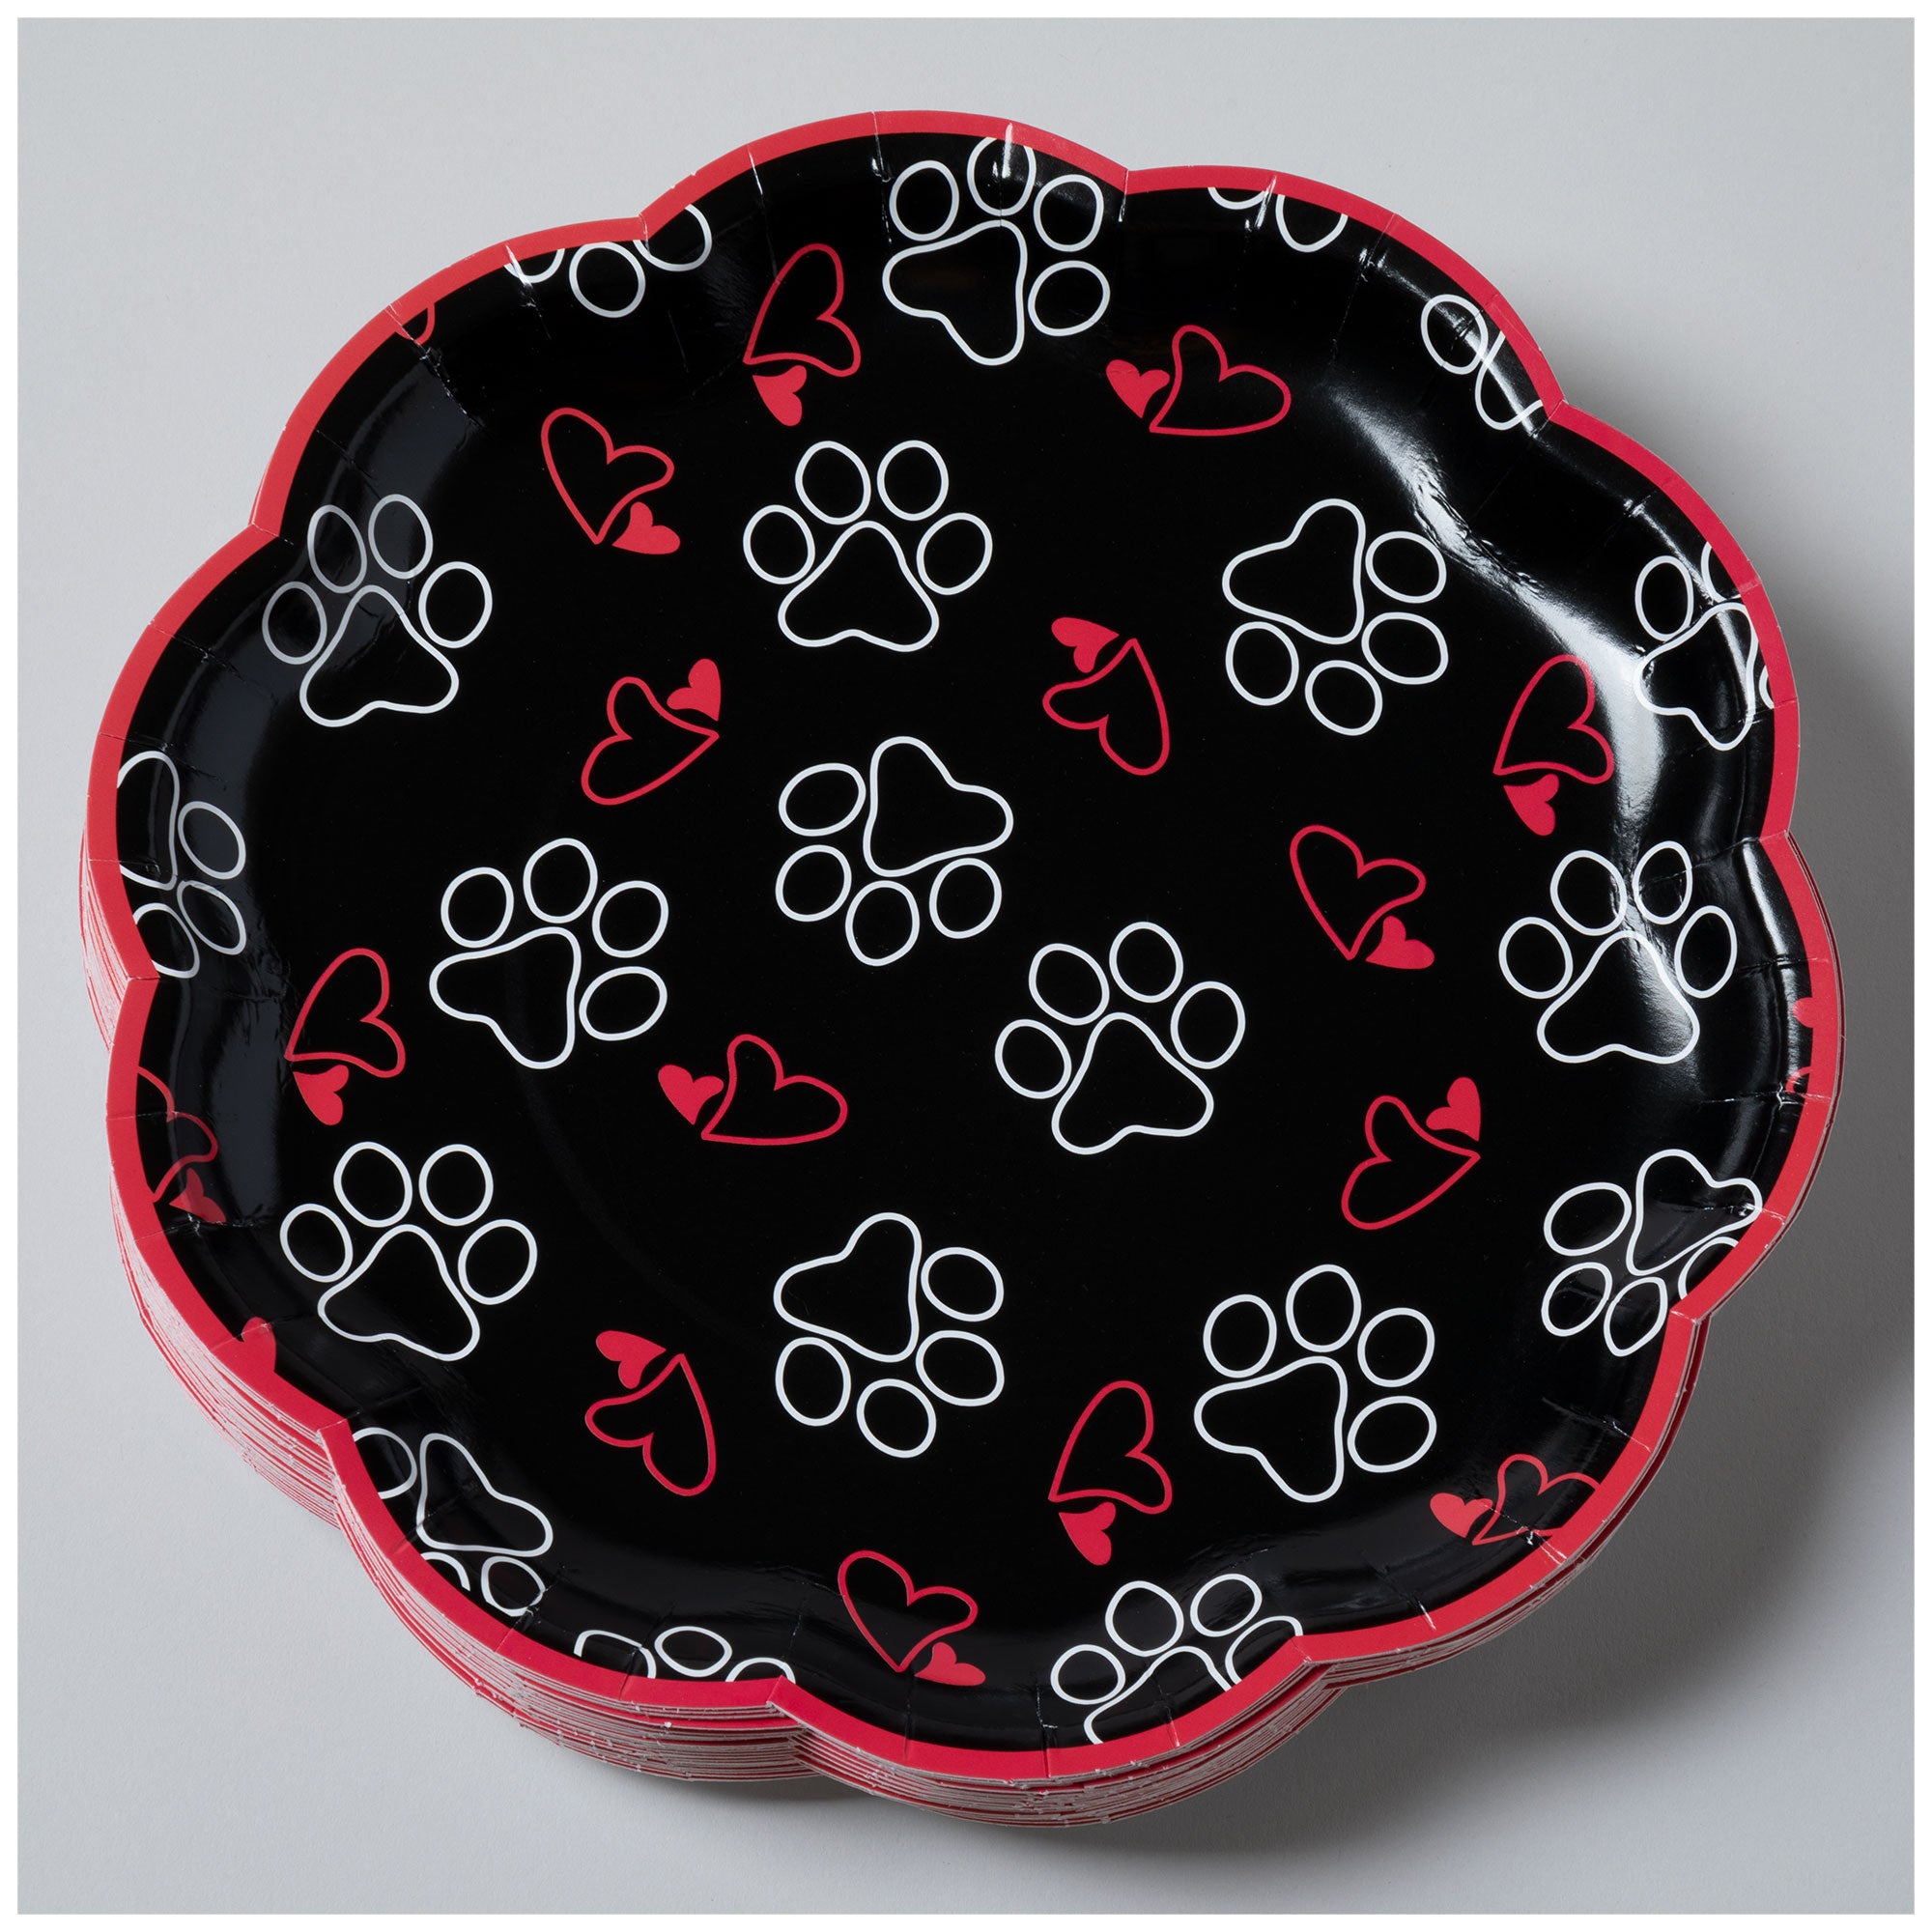 Pawfect Occasion Paper Plates & Napkins - Outlined Paws & Hearts - Plates Only